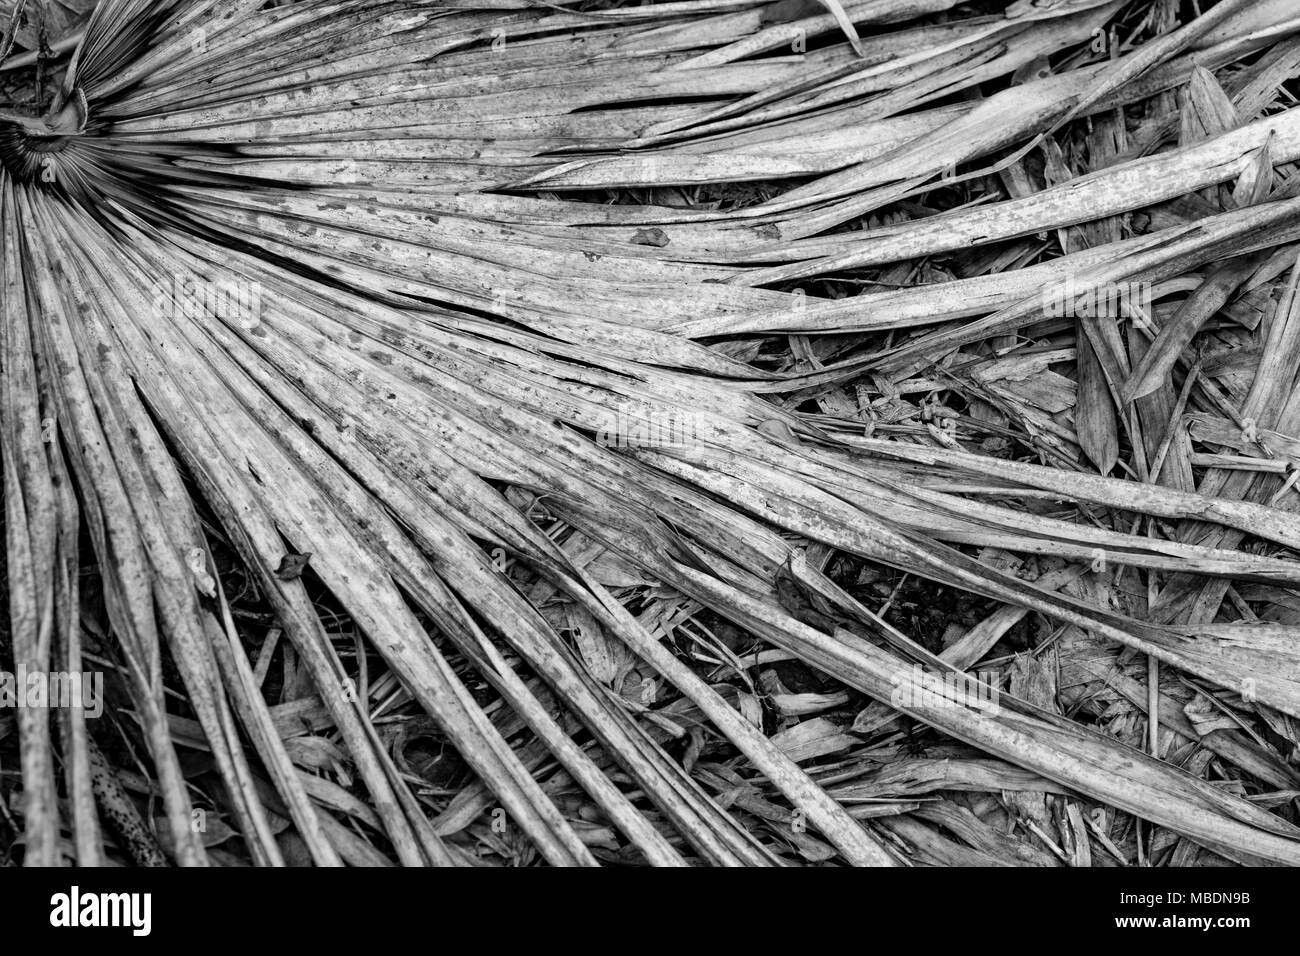 Black and whire image of the fronds of a dead palm leaf. Stock Photo